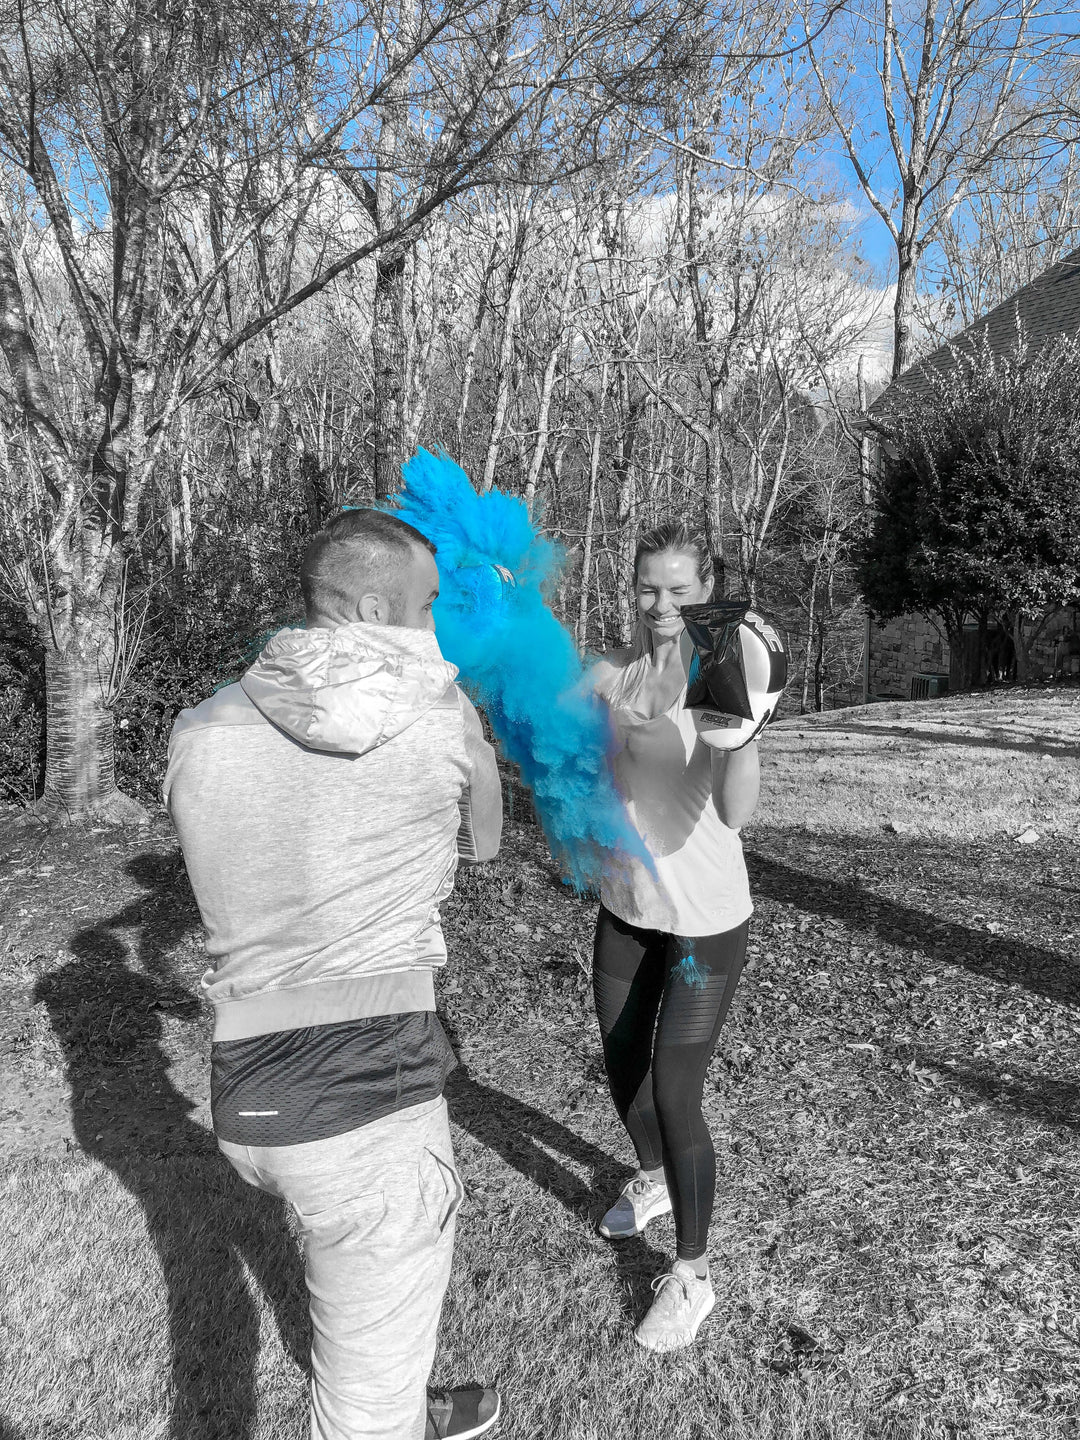 Poof There It Is Sports Gender Reveal Boxing MMA UFC Gender Reveal